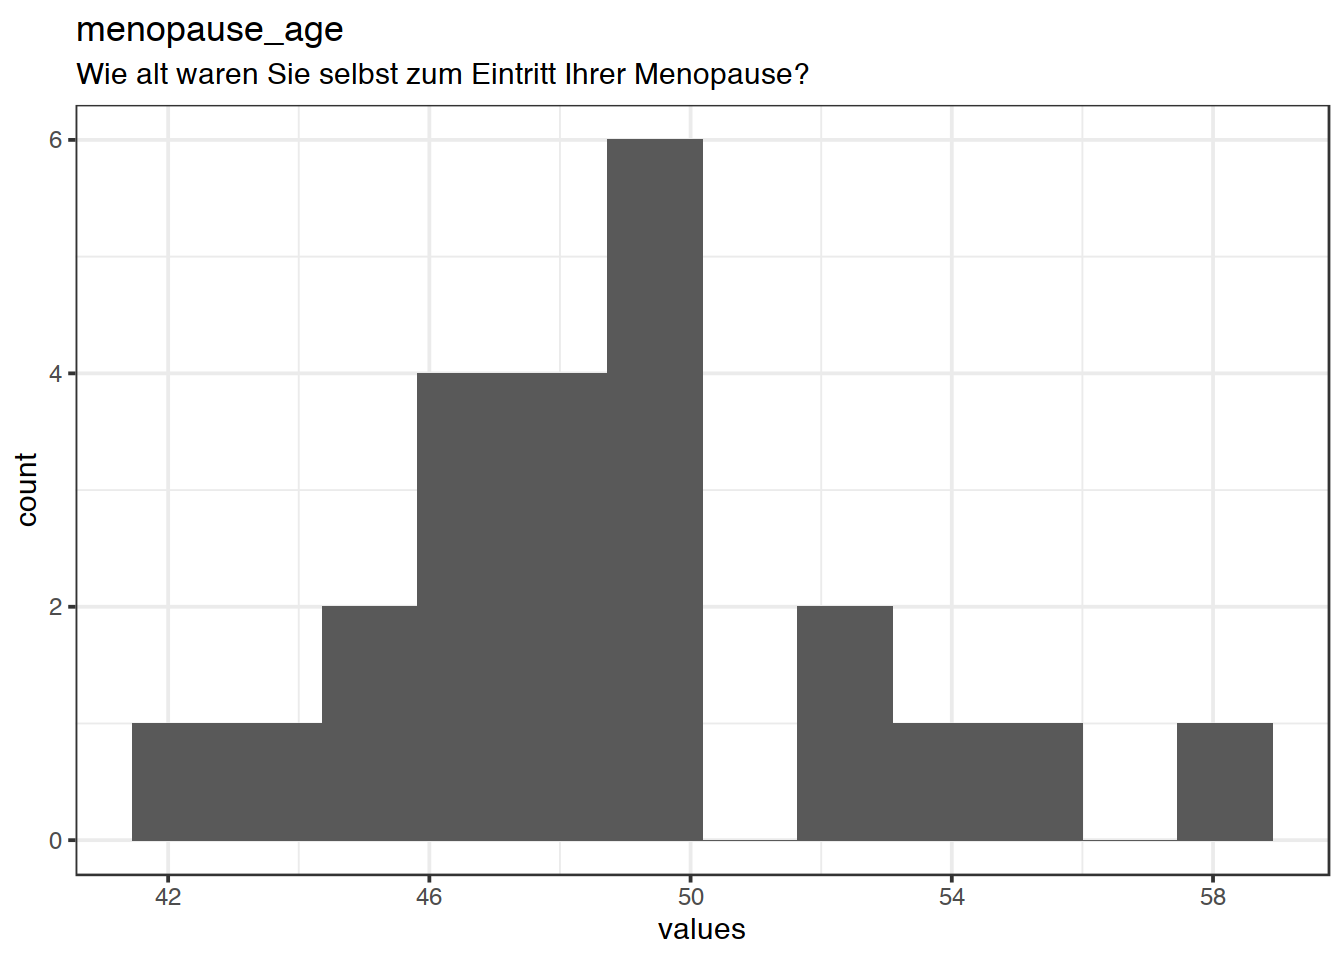 Distribution of values for menopause_age